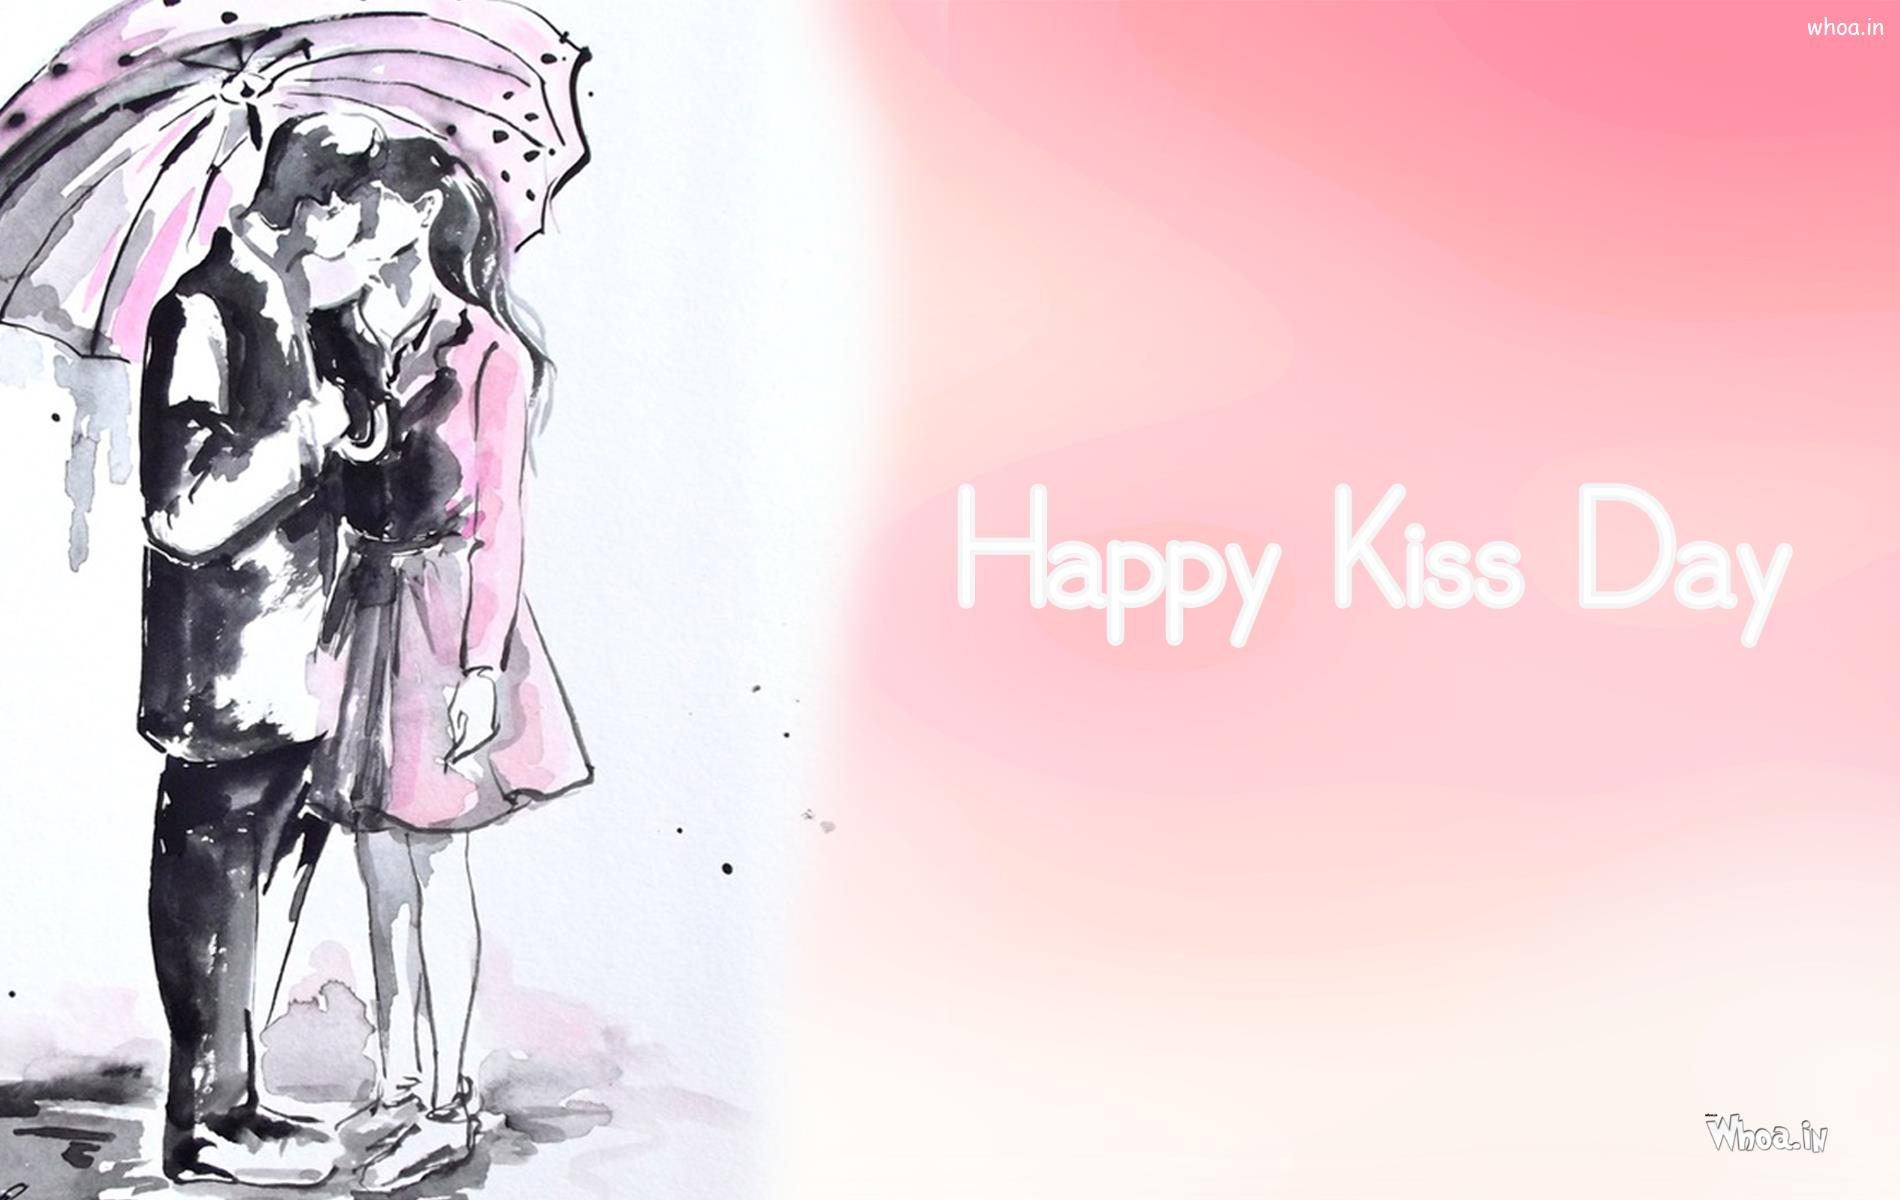 Happy Kiss Day Hand Painting Hd Wallpaper#1